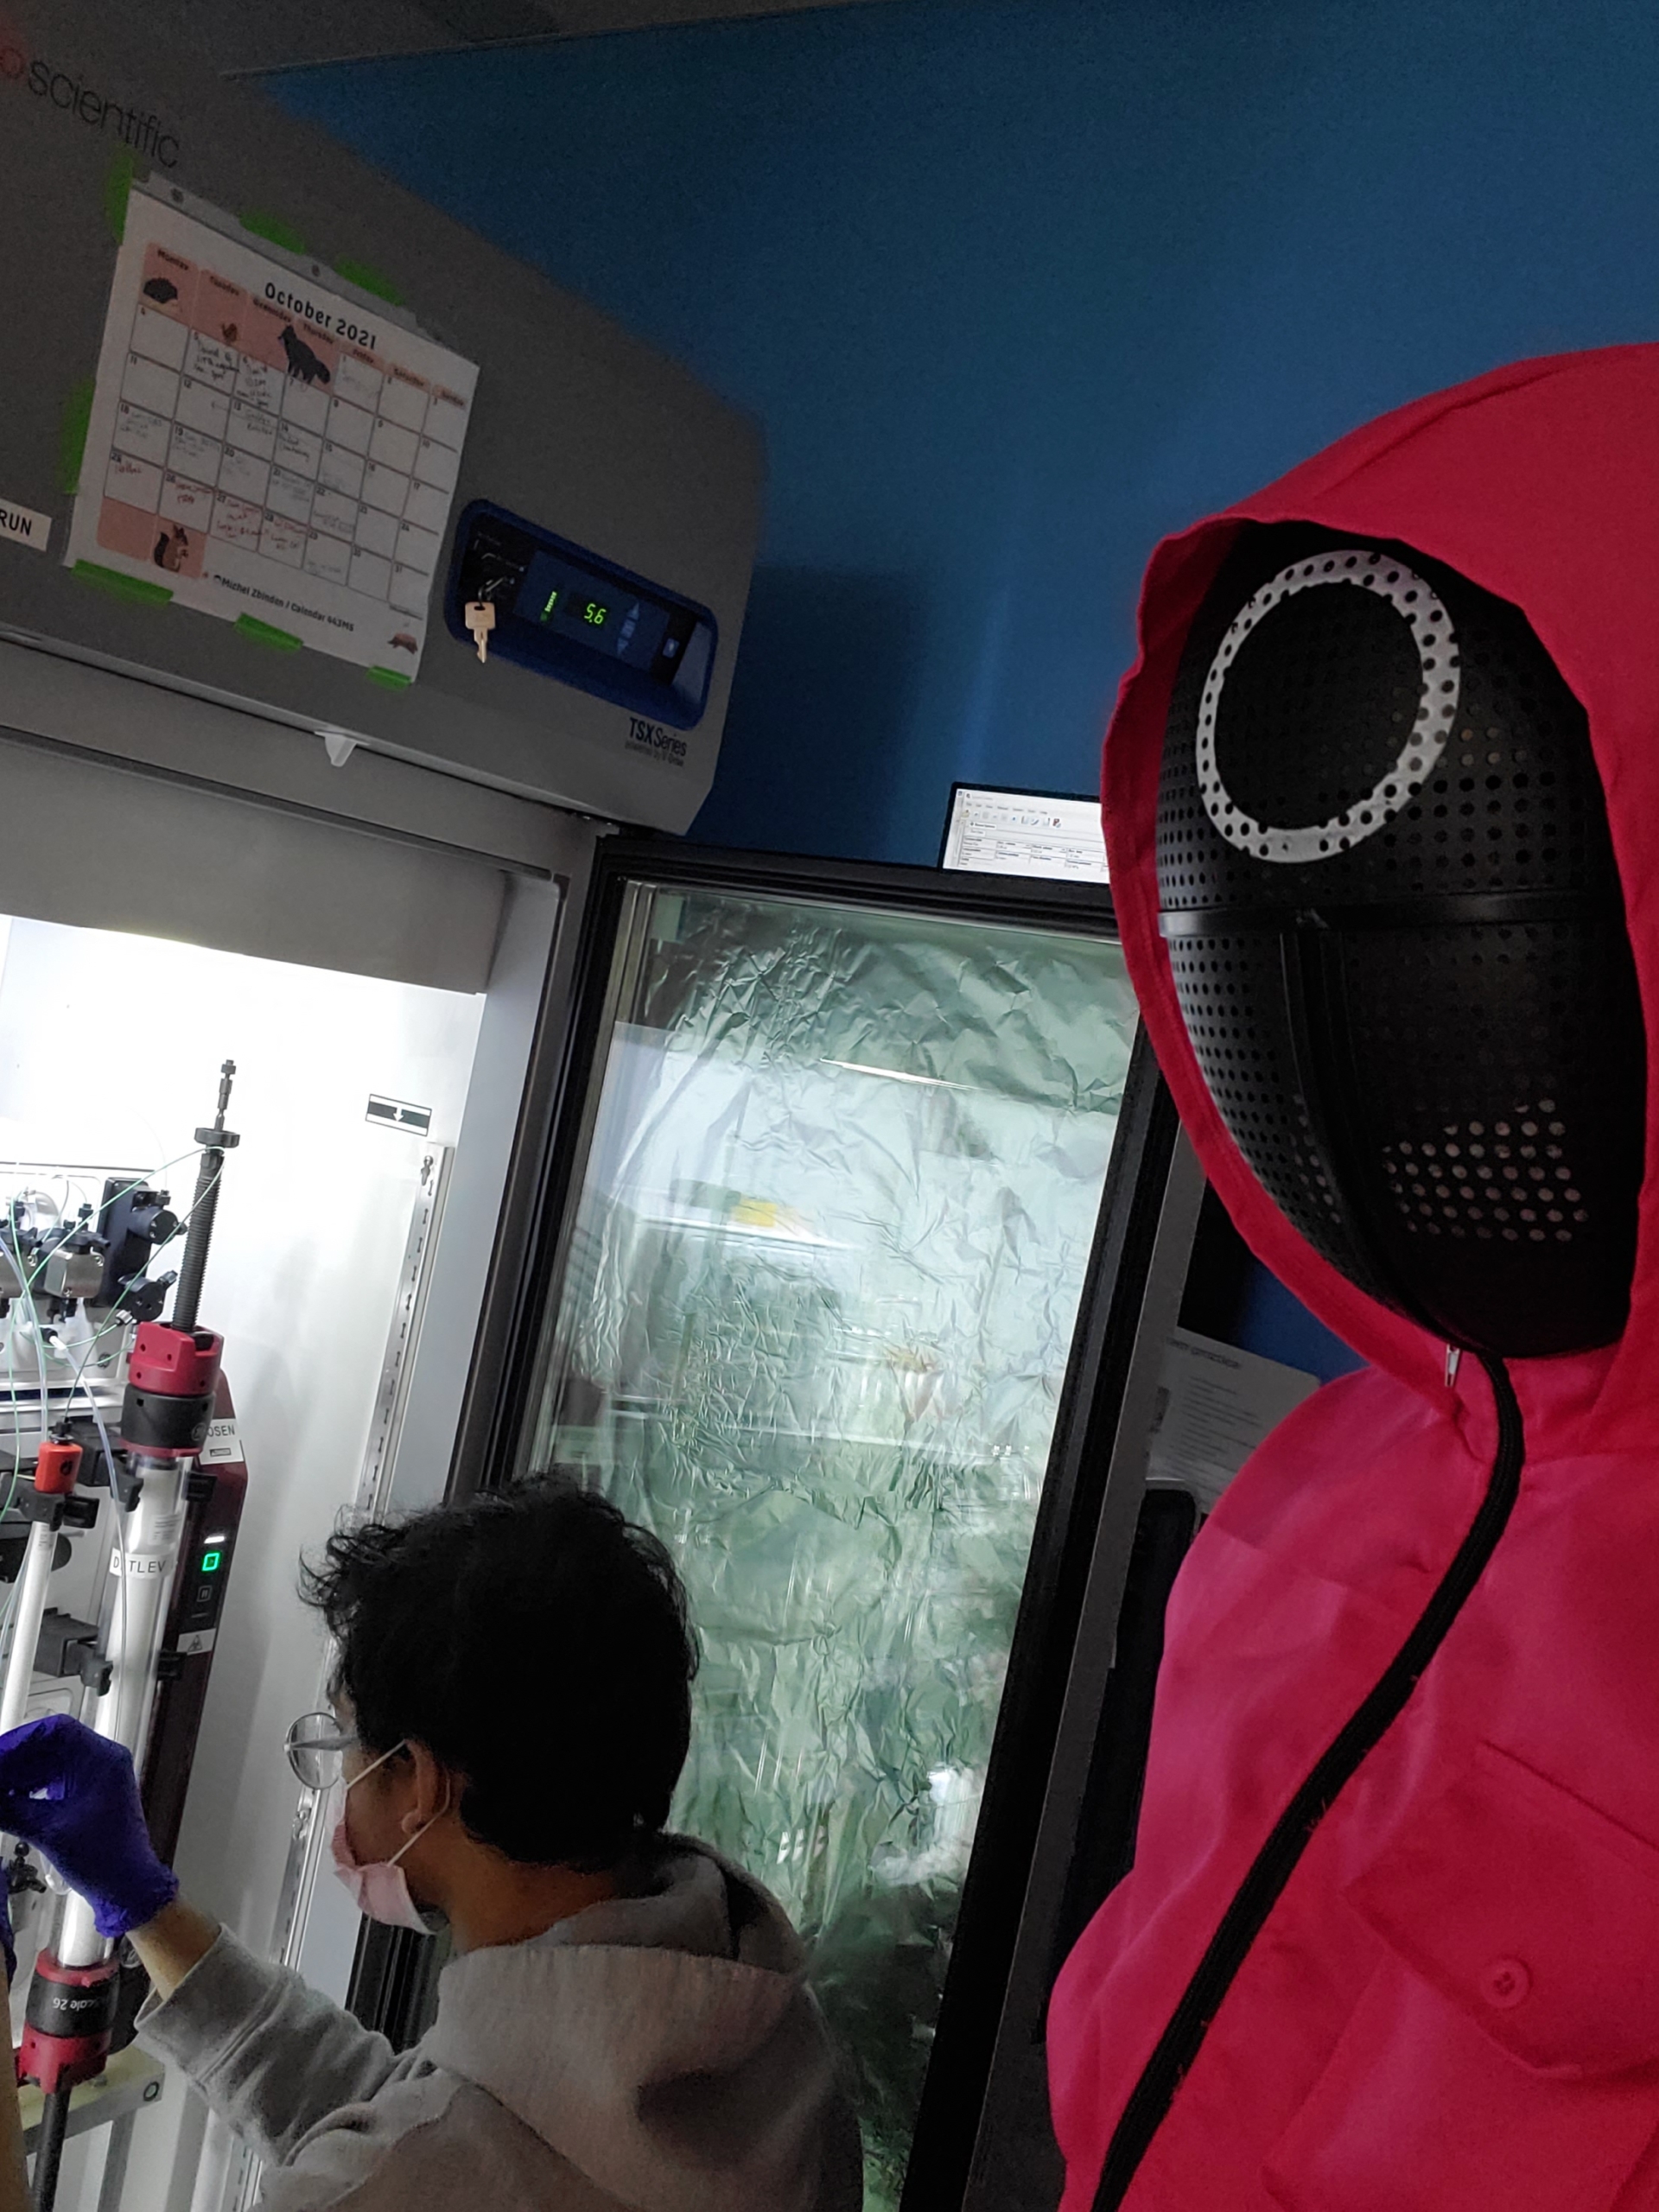 A person with his back turned to the camera while he tends to something in the lab refrigerator. Another person dressed in a Squid Game costume takes a selfie.